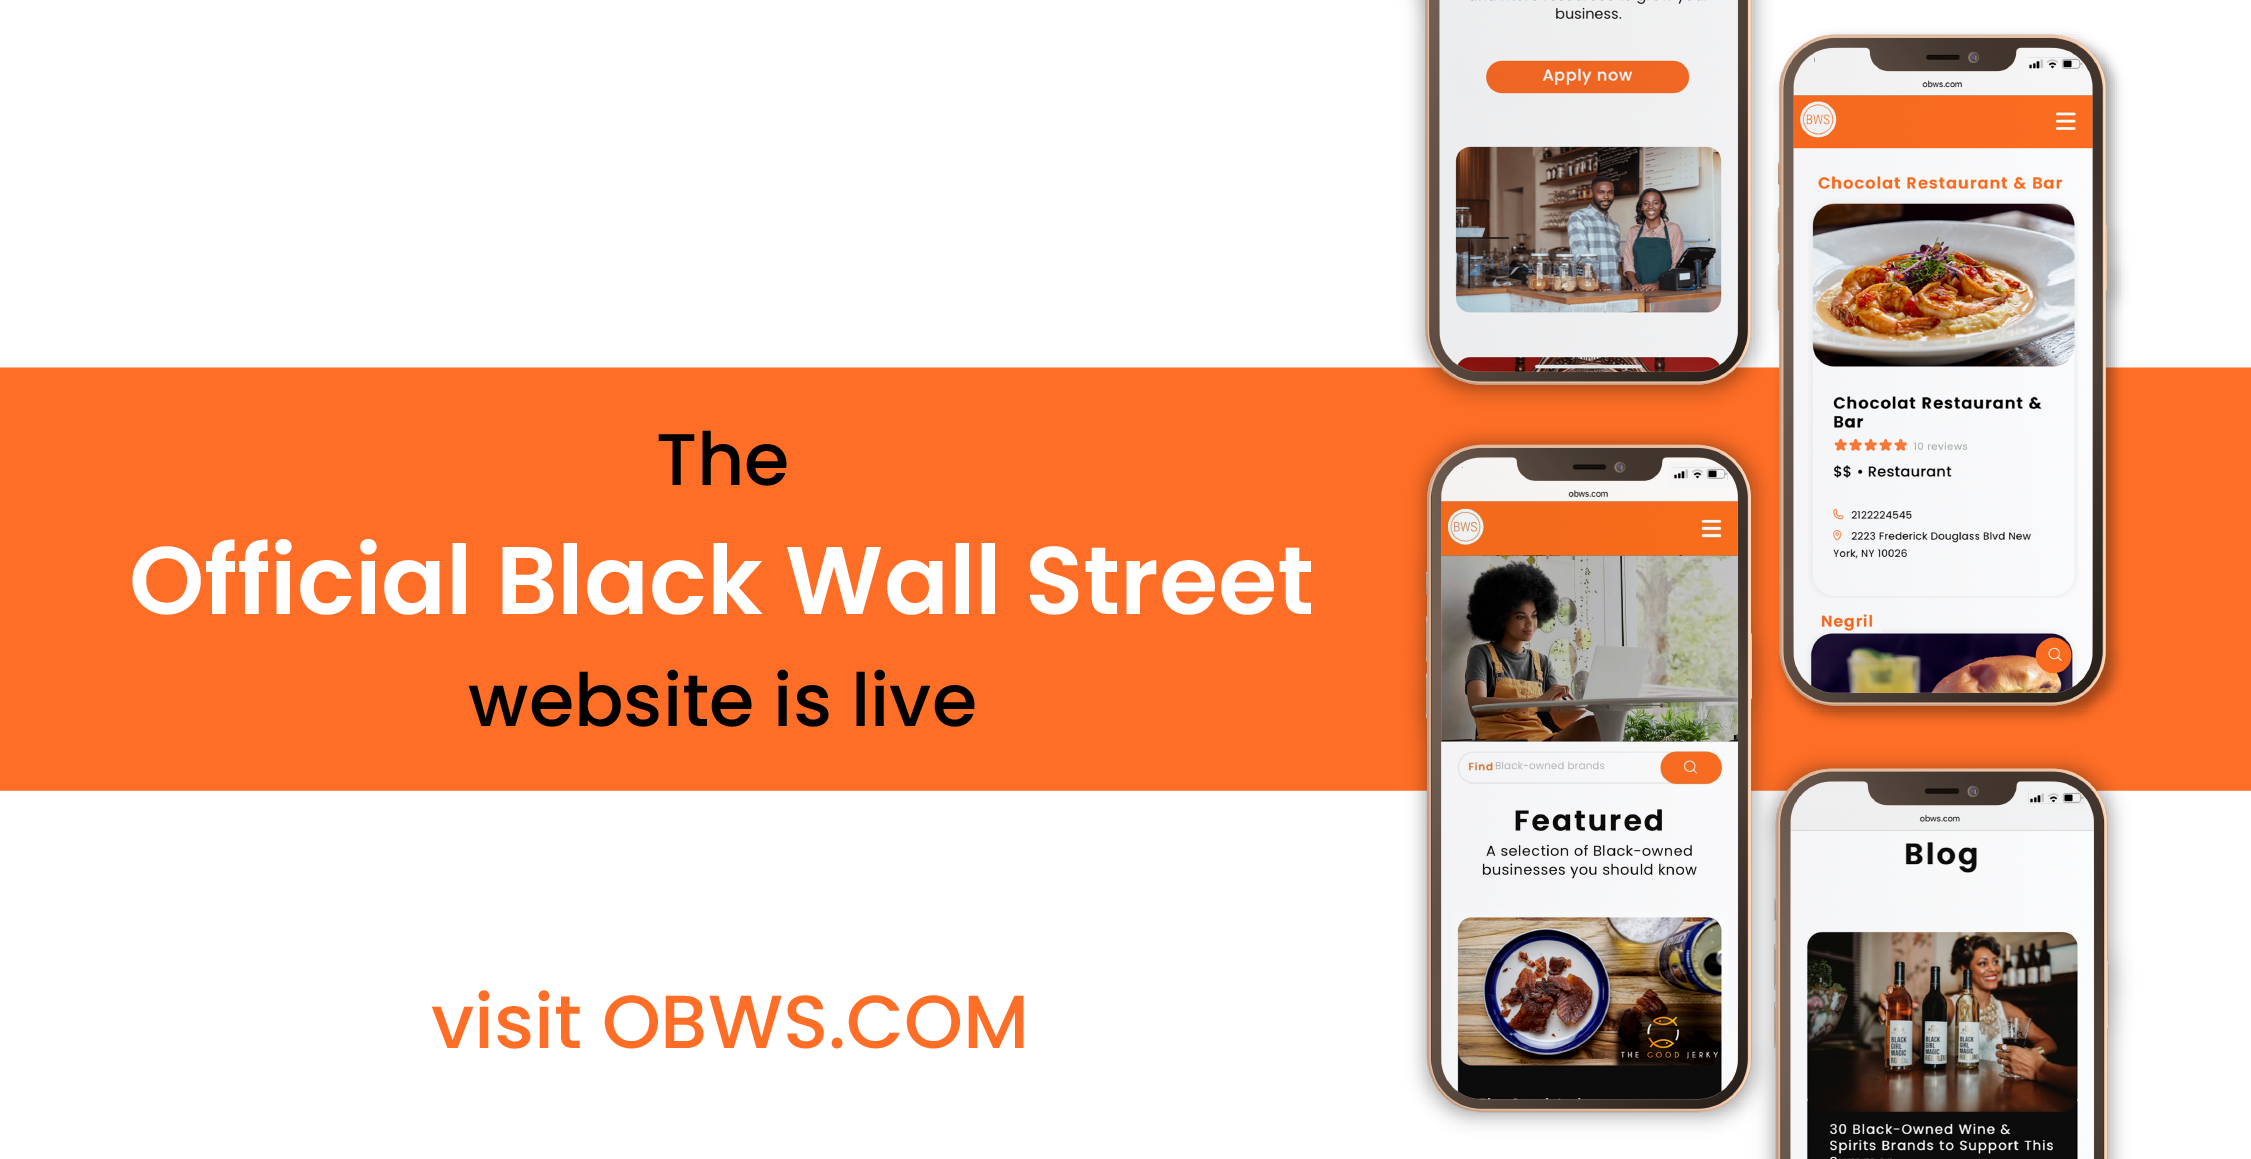 Official Black Wall Street Relaunches Site with Brand New Look and Features